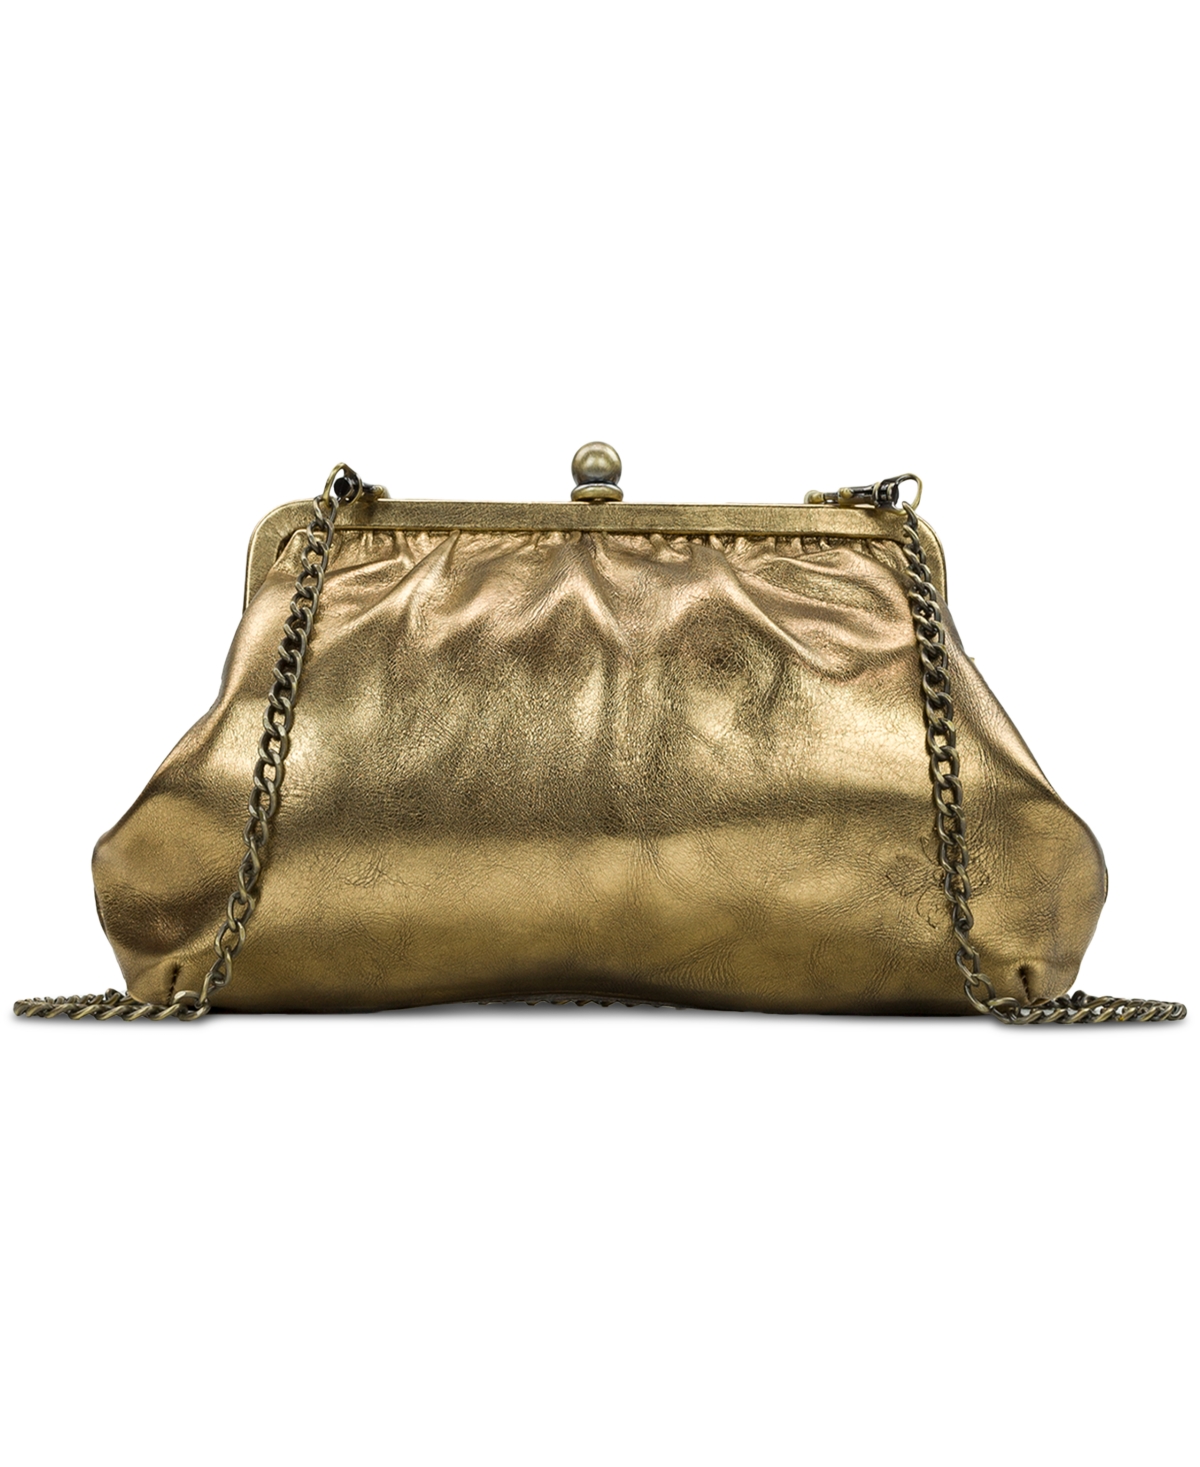 Patricia Nash Ealing Distressed Metallic Leather Frame Bag In Antique Gold